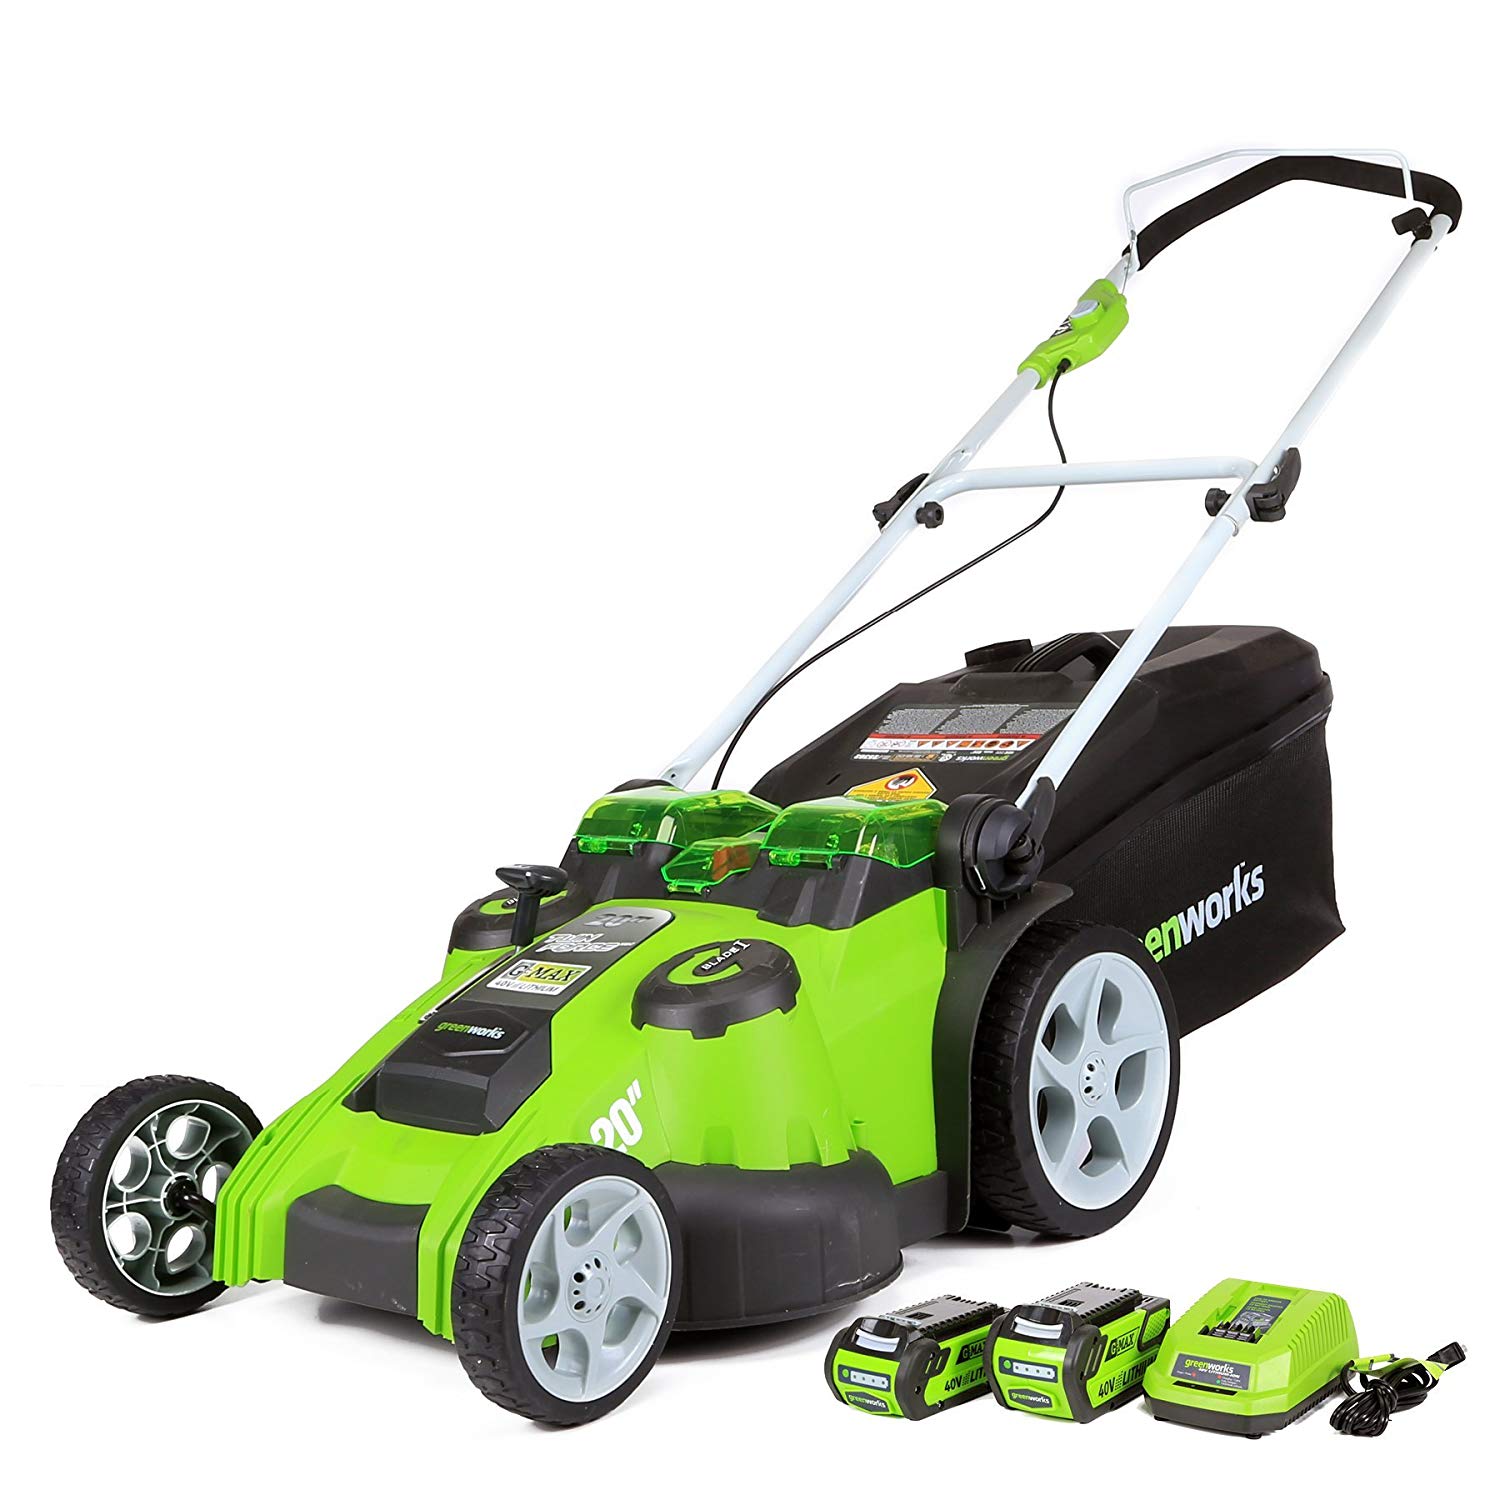 Amazon.com : Greenworks 20-Inch 40V Twin Force Cordless Lawn Mower ...